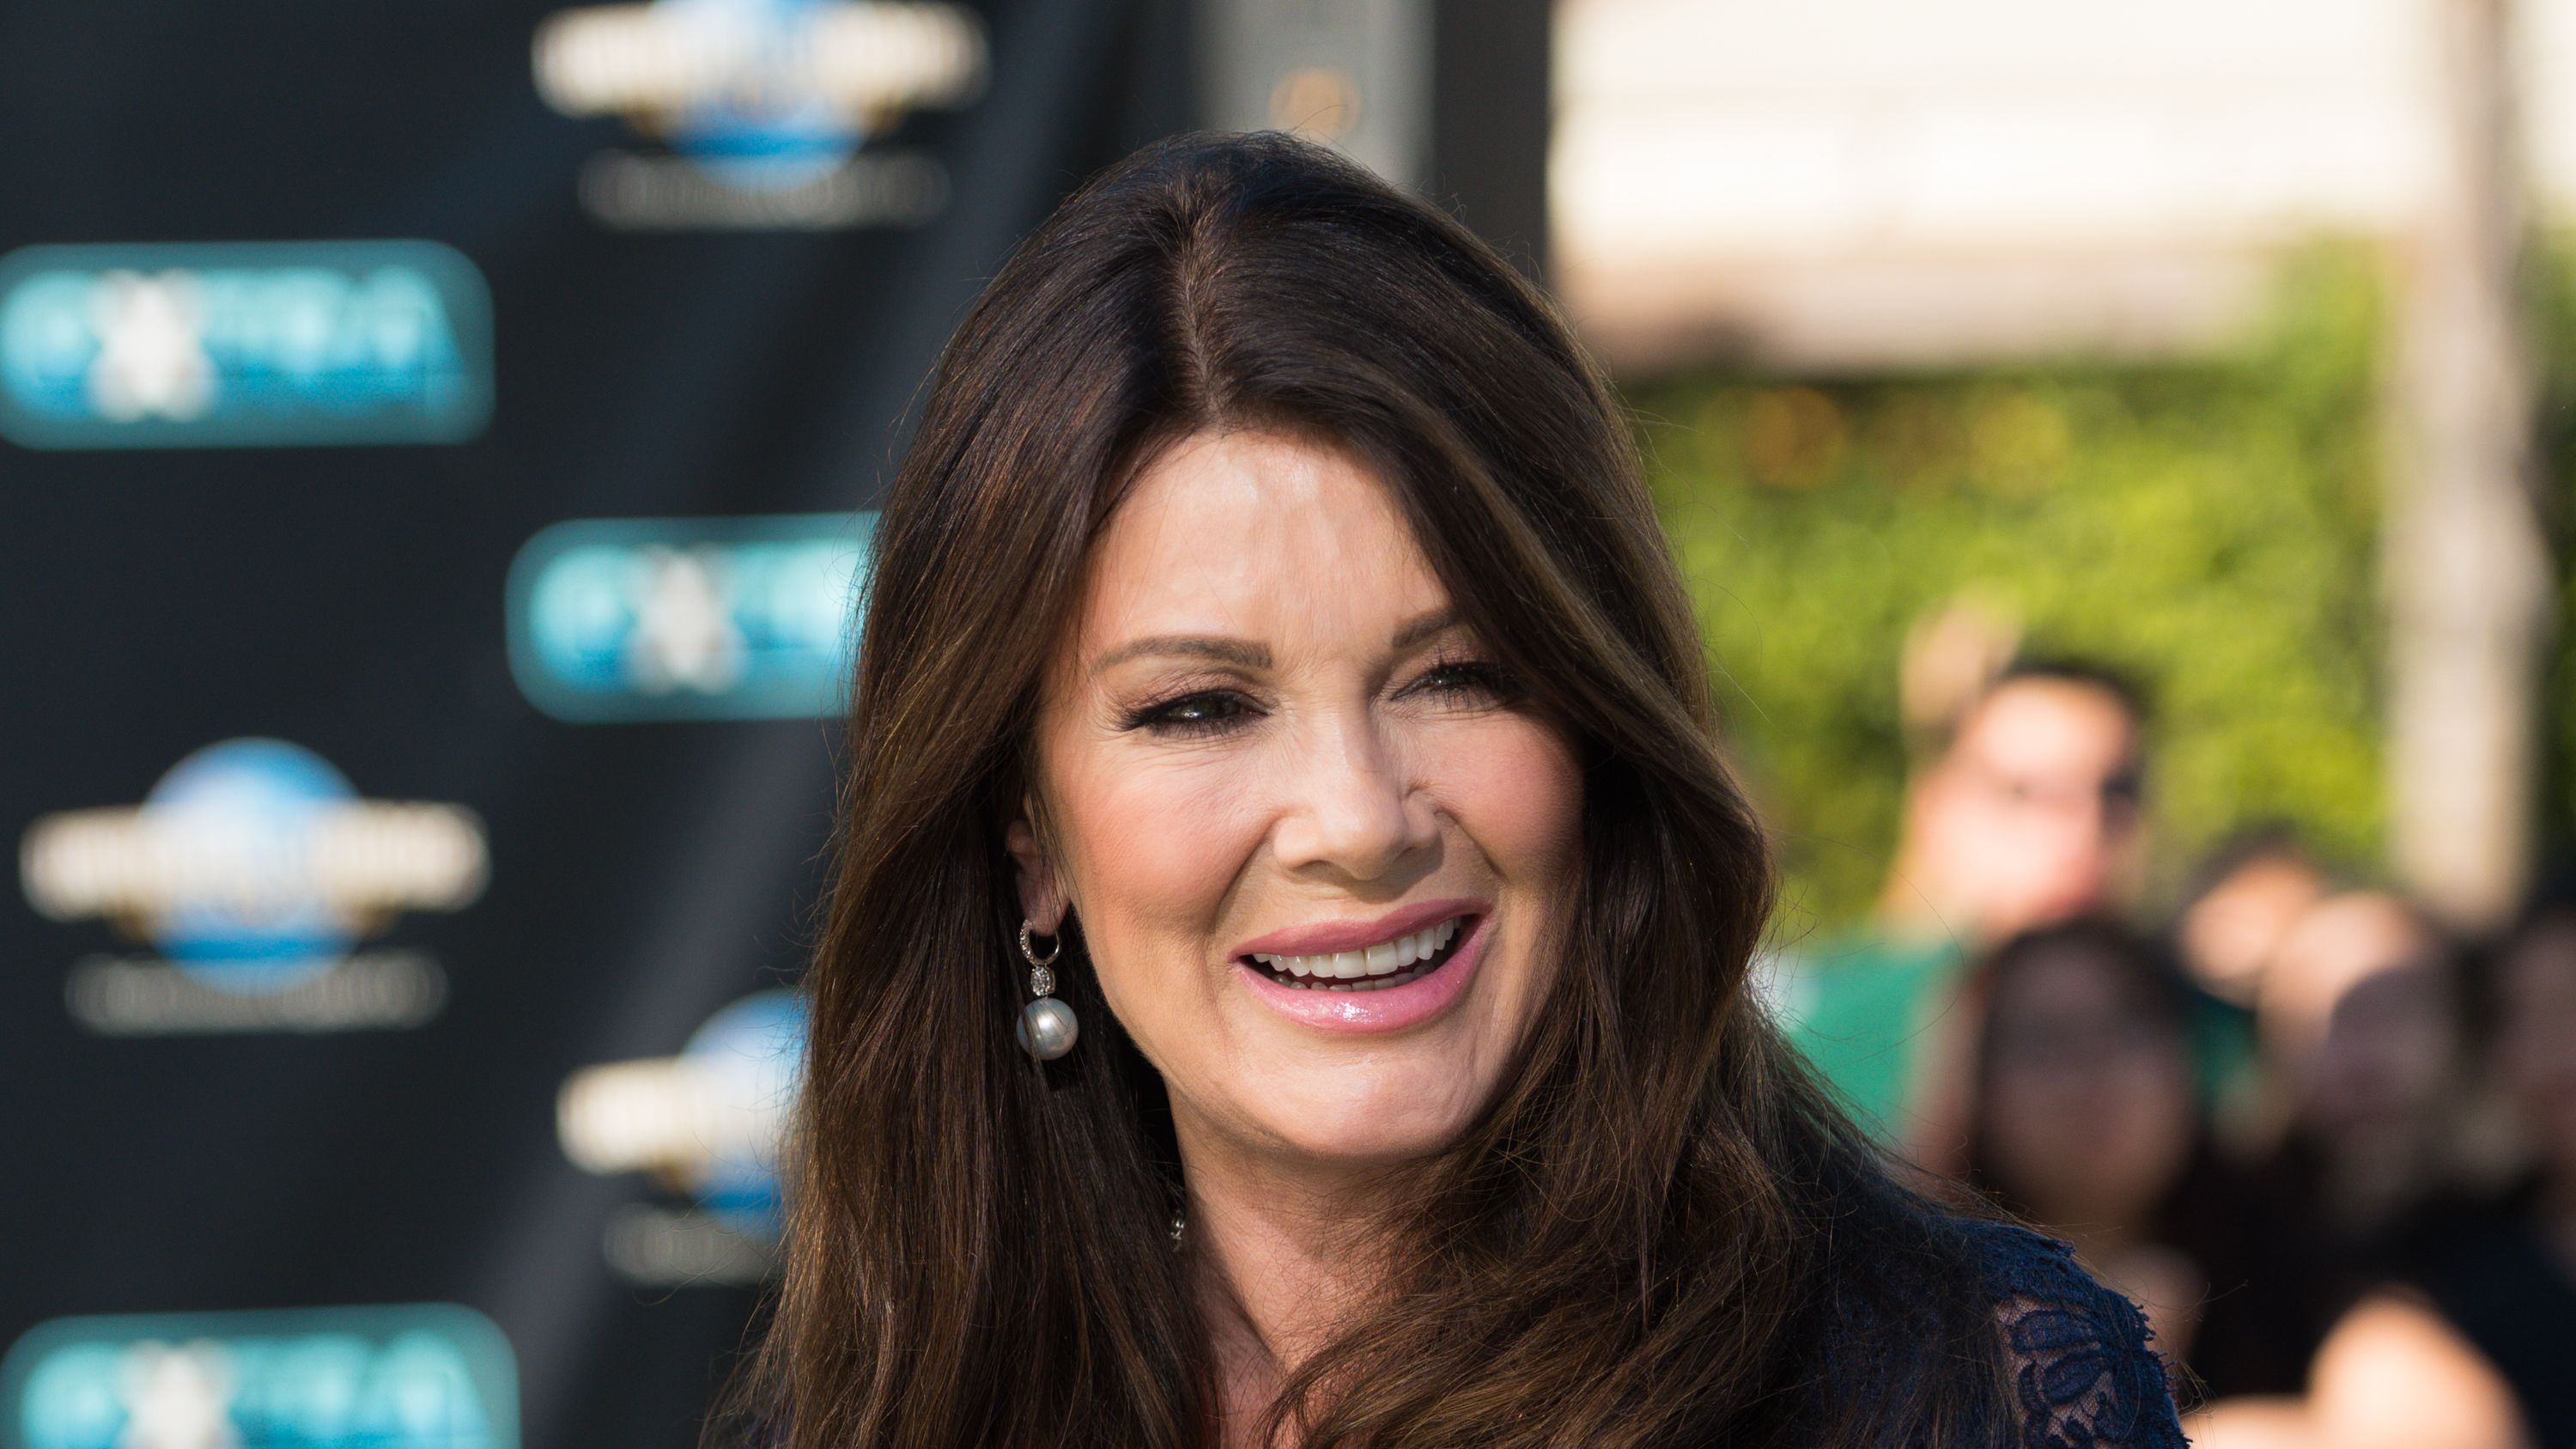 TELEVISION STAR AND RESTAURATEUR LISA VANDERPUMP HOSTED THE STAR